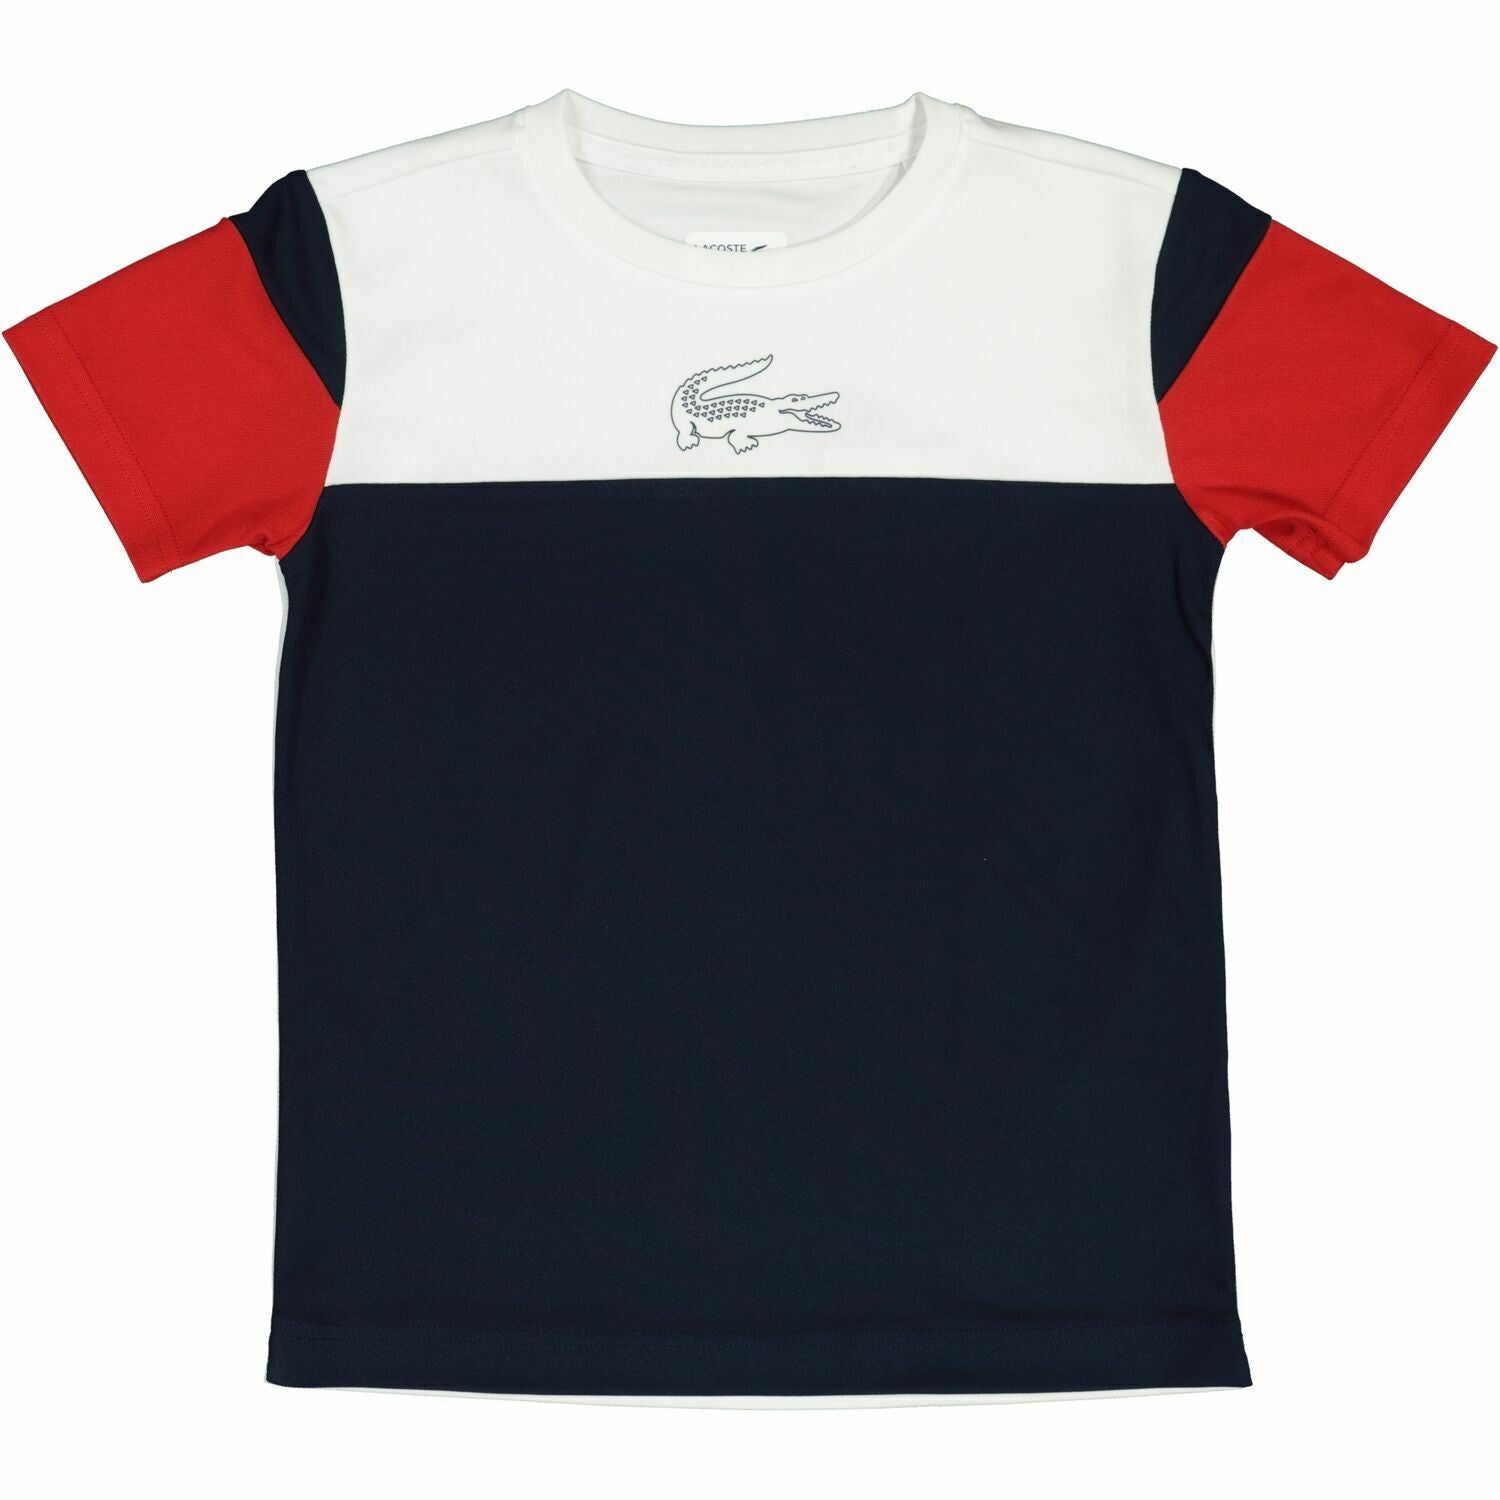 LACOSTE SPORT Boys' Kids' Colour Block T-shirt, Blue/Red/White, size 8 years